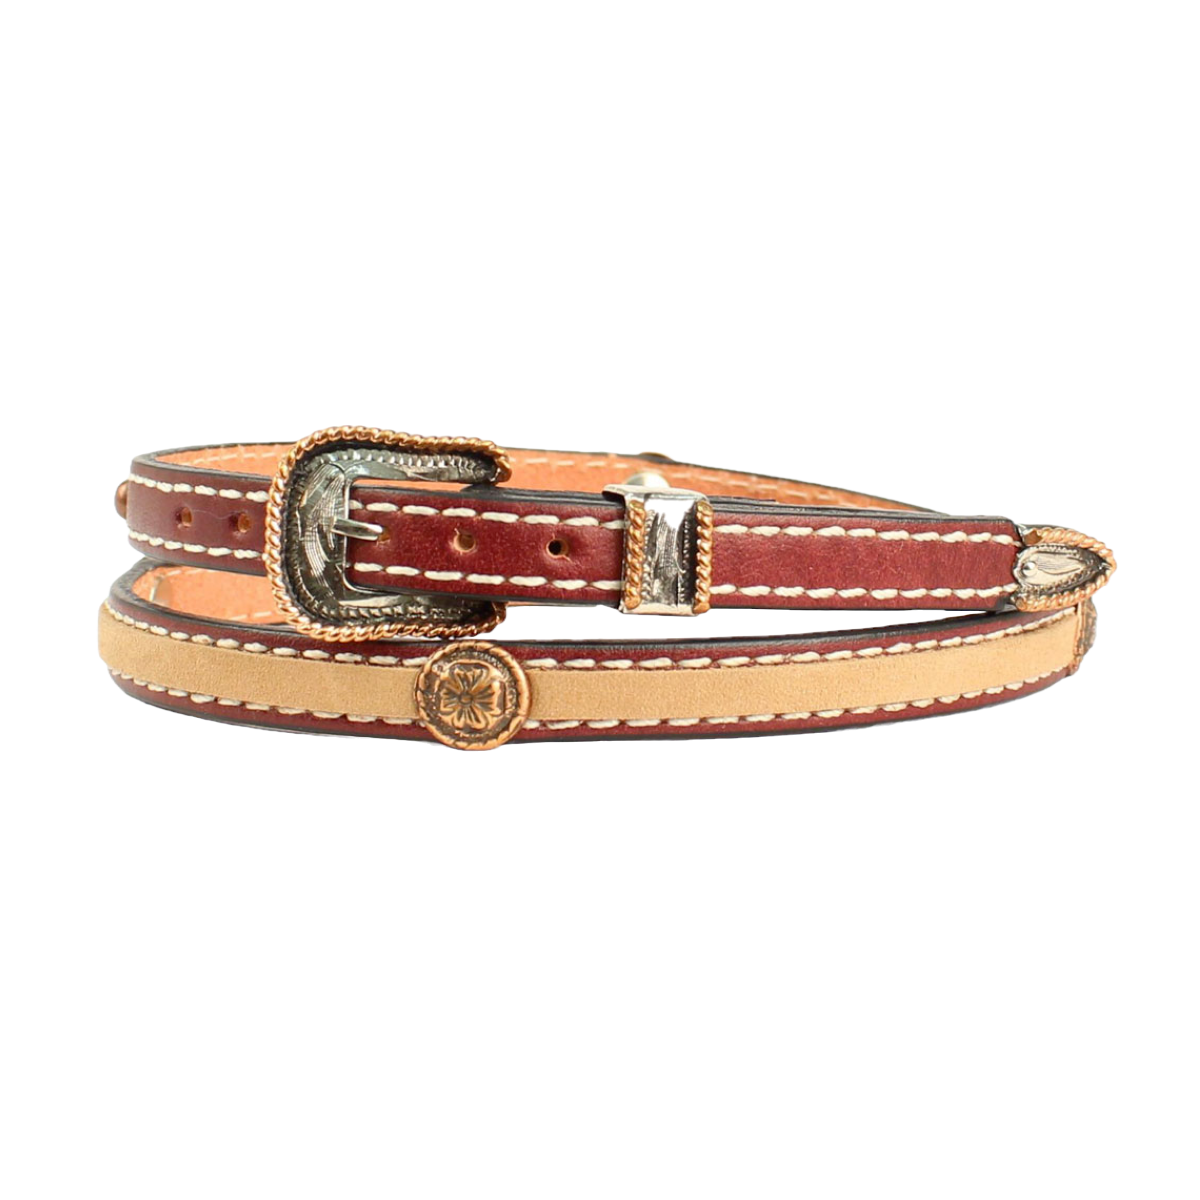 Twister Leather With Round Copper Conchos Hatband 0200508